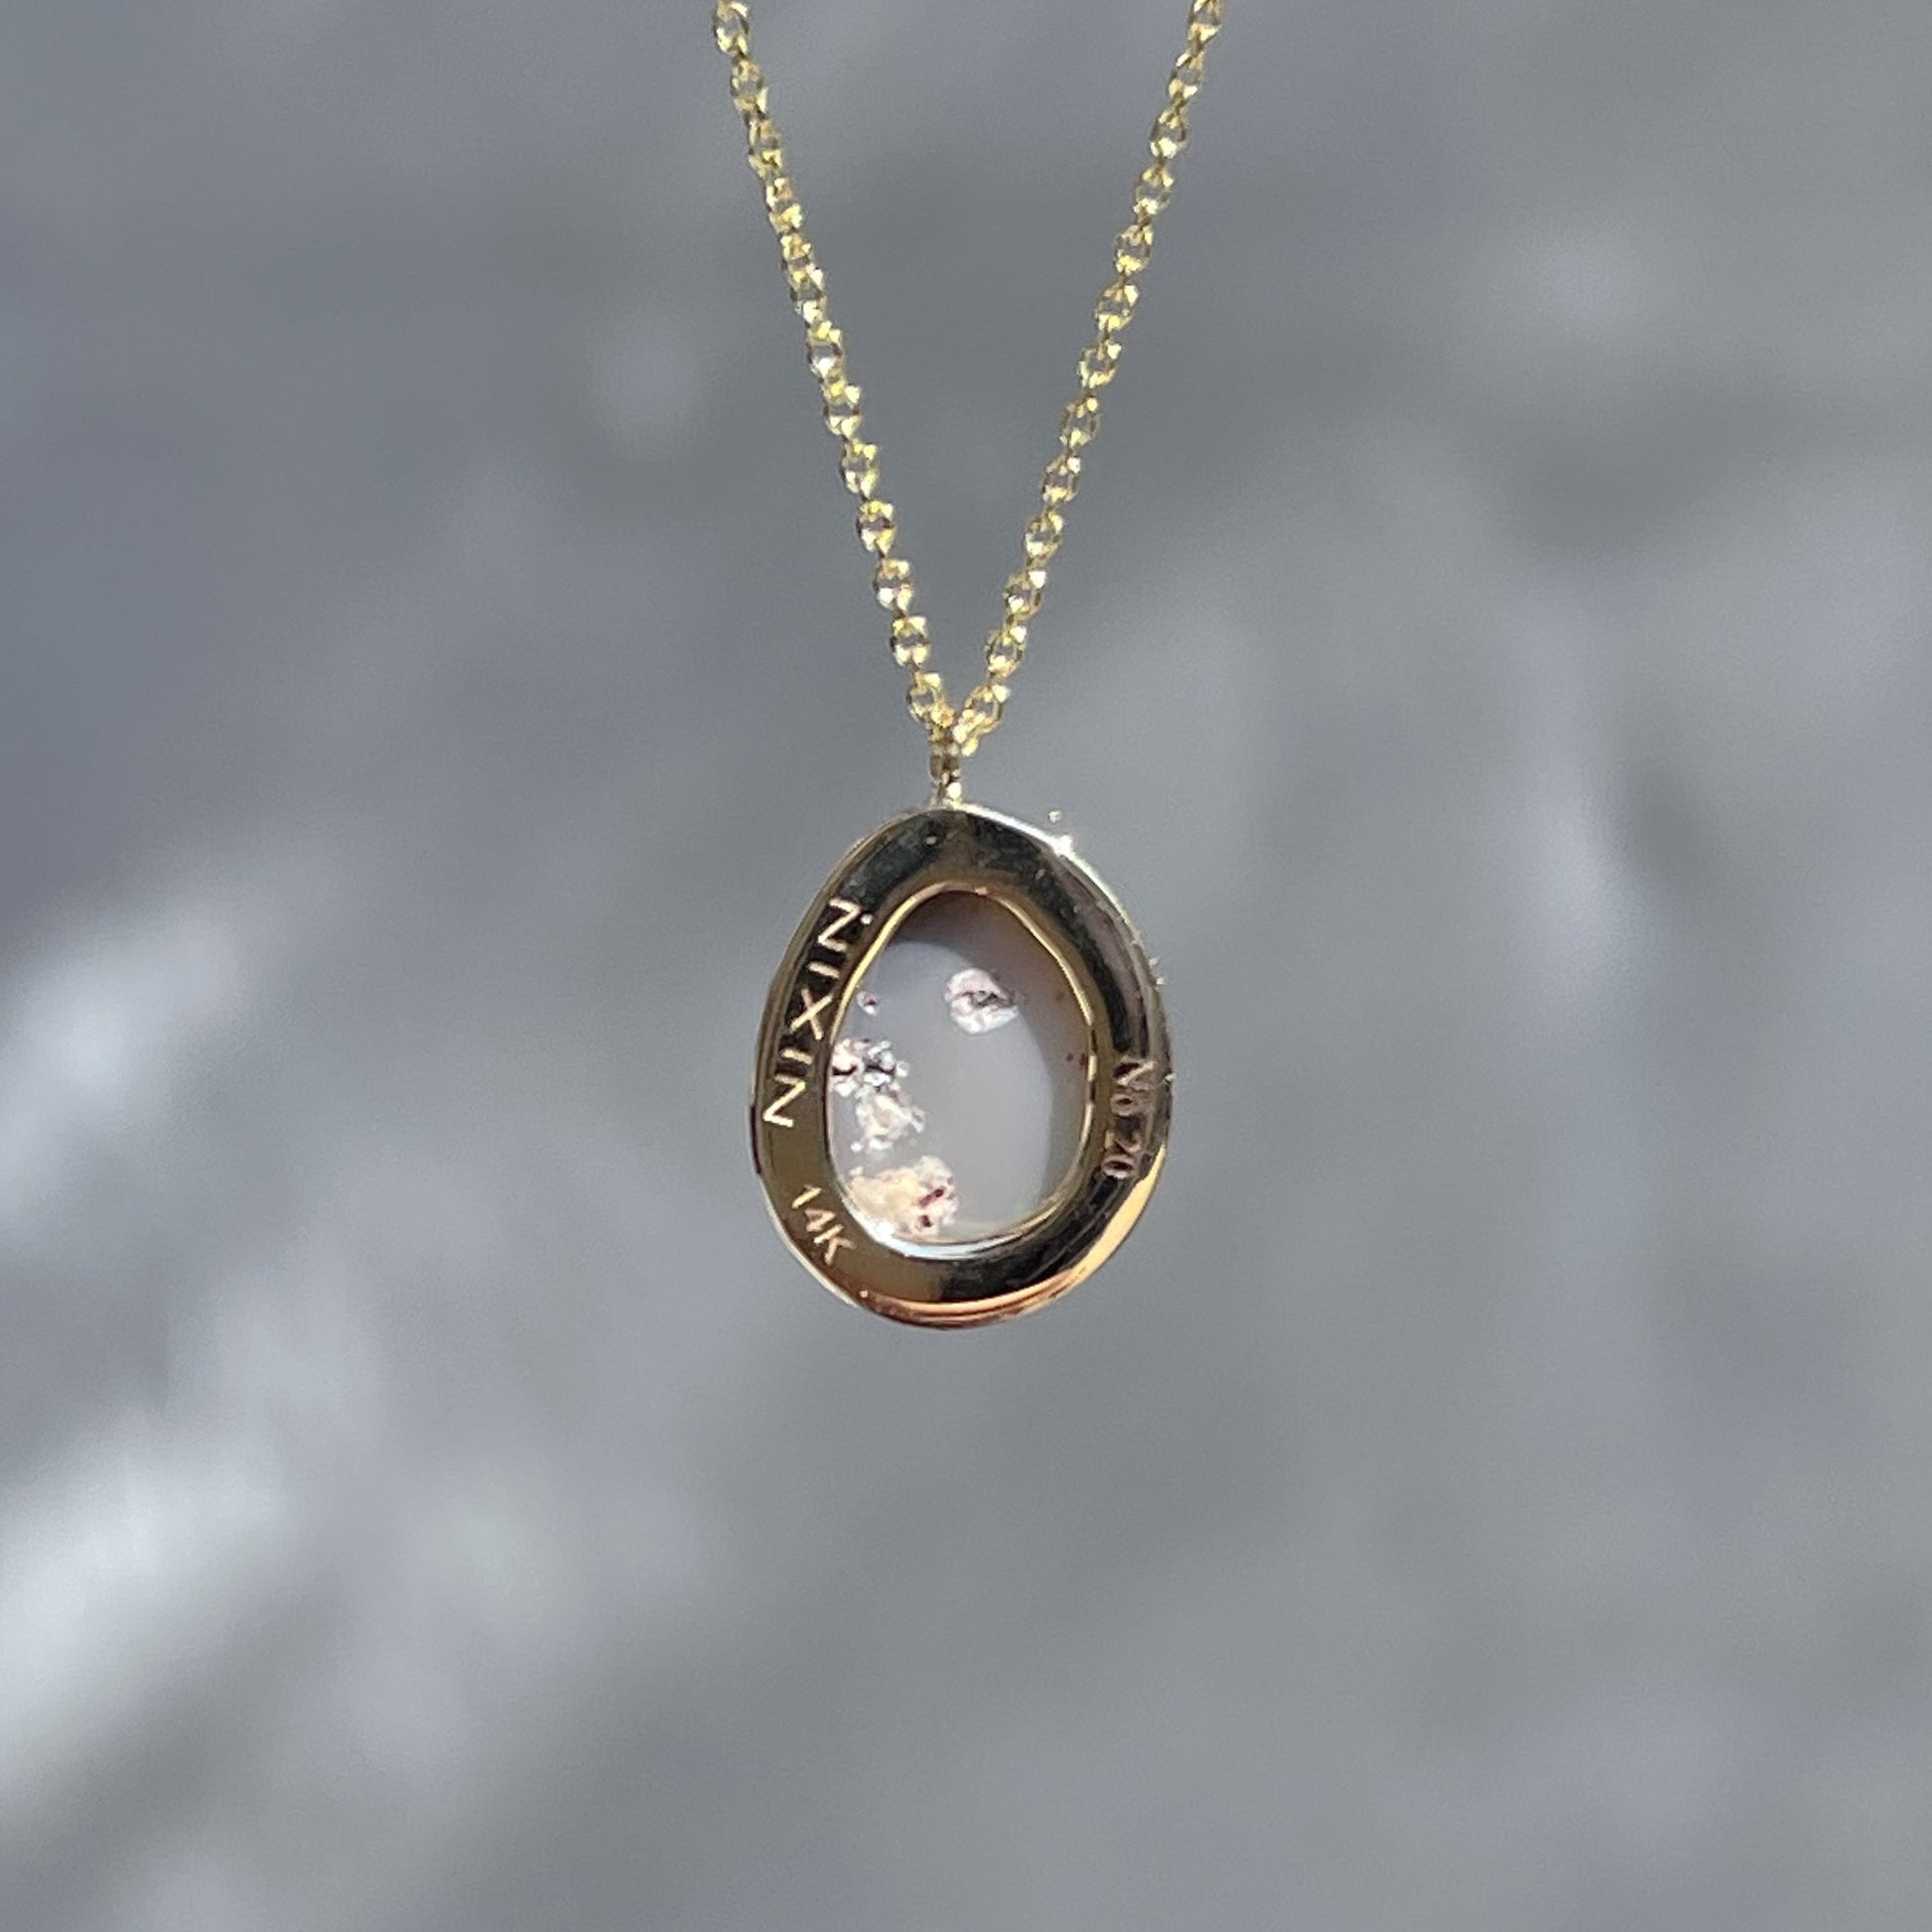 Back view of an Australian Opal Necklace by NIXIN Jewelry showing the real opal and the engraving on the bezel seat.